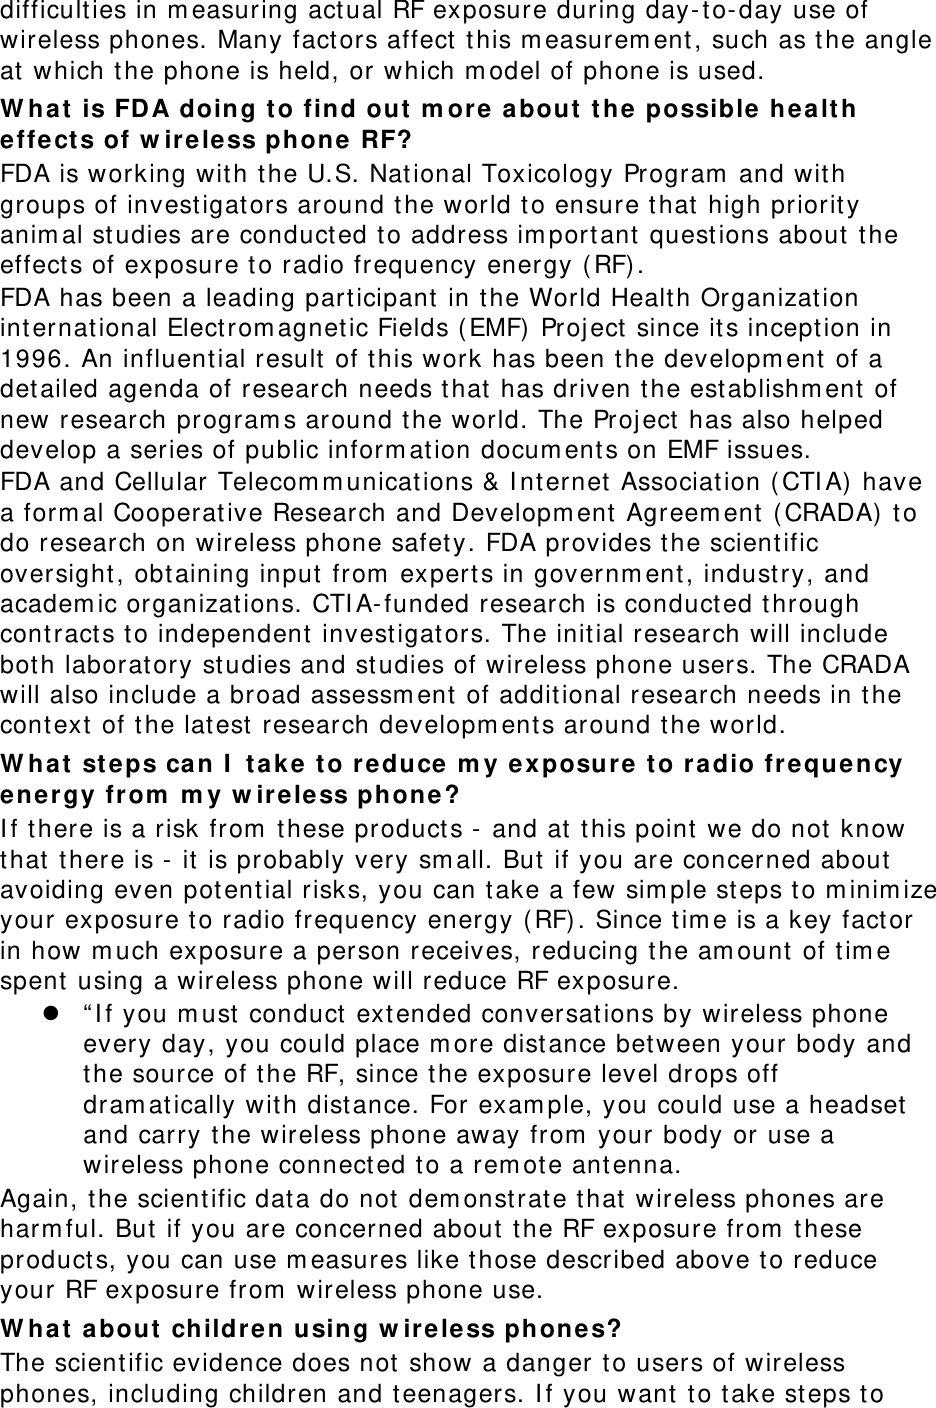 difficulties in measuring actual RF exposure during day-to-day use of wireless phones. Many factors affect this measurement, such as the angle at which the phone is held, or which model of phone is used. What is FDA doing to find out more about the possible health effects of wireless phone RF? FDA is working with the U.S. National Toxicology Program and with groups of investigators around the world to ensure that high priority animal studies are conducted to address important questions about the effects of exposure to radio frequency energy (RF). FDA has been a leading participant in the World Health Organization international Electromagnetic Fields (EMF) Project since its inception in 1996. An influential result of this work has been the development of a detailed agenda of research needs that has driven the establishment of new research programs around the world. The Project has also helped develop a series of public information documents on EMF issues. FDA and Cellular Telecommunications &amp; Internet Association (CTIA) have a formal Cooperative Research and Development Agreement (CRADA) to do research on wireless phone safety. FDA provides the scientific oversight, obtaining input from experts in government, industry, and academic organizations. CTIA-funded research is conducted through contracts to independent investigators. The initial research will include both laboratory studies and studies of wireless phone users. The CRADA will also include a broad assessment of additional research needs in the context of the latest research developments around the world. What steps can I take to reduce my exposure to radio frequency energy from my wireless phone? If there is a risk from these products - and at this point we do not know that there is - it is probably very small. But if you are concerned about avoiding even potential risks, you can take a few simple steps to minimize your exposure to radio frequency energy (RF). Since time is a key factor in how much exposure a person receives, reducing the amount of time spent using a wireless phone will reduce RF exposure.  “If you must conduct extended conversations by wireless phone every day, you could place more distance between your body and the source of the RF, since the exposure level drops off dramatically with distance. For example, you could use a headset and carry the wireless phone away from your body or use a wireless phone connected to a remote antenna. Again, the scientific data do not demonstrate that wireless phones are harmful. But if you are concerned about the RF exposure from these products, you can use measures like those described above to reduce your RF exposure from wireless phone use. What about children using wireless phones? The scientific evidence does not show a danger to users of wireless phones, including children and teenagers. If you want to take steps to 